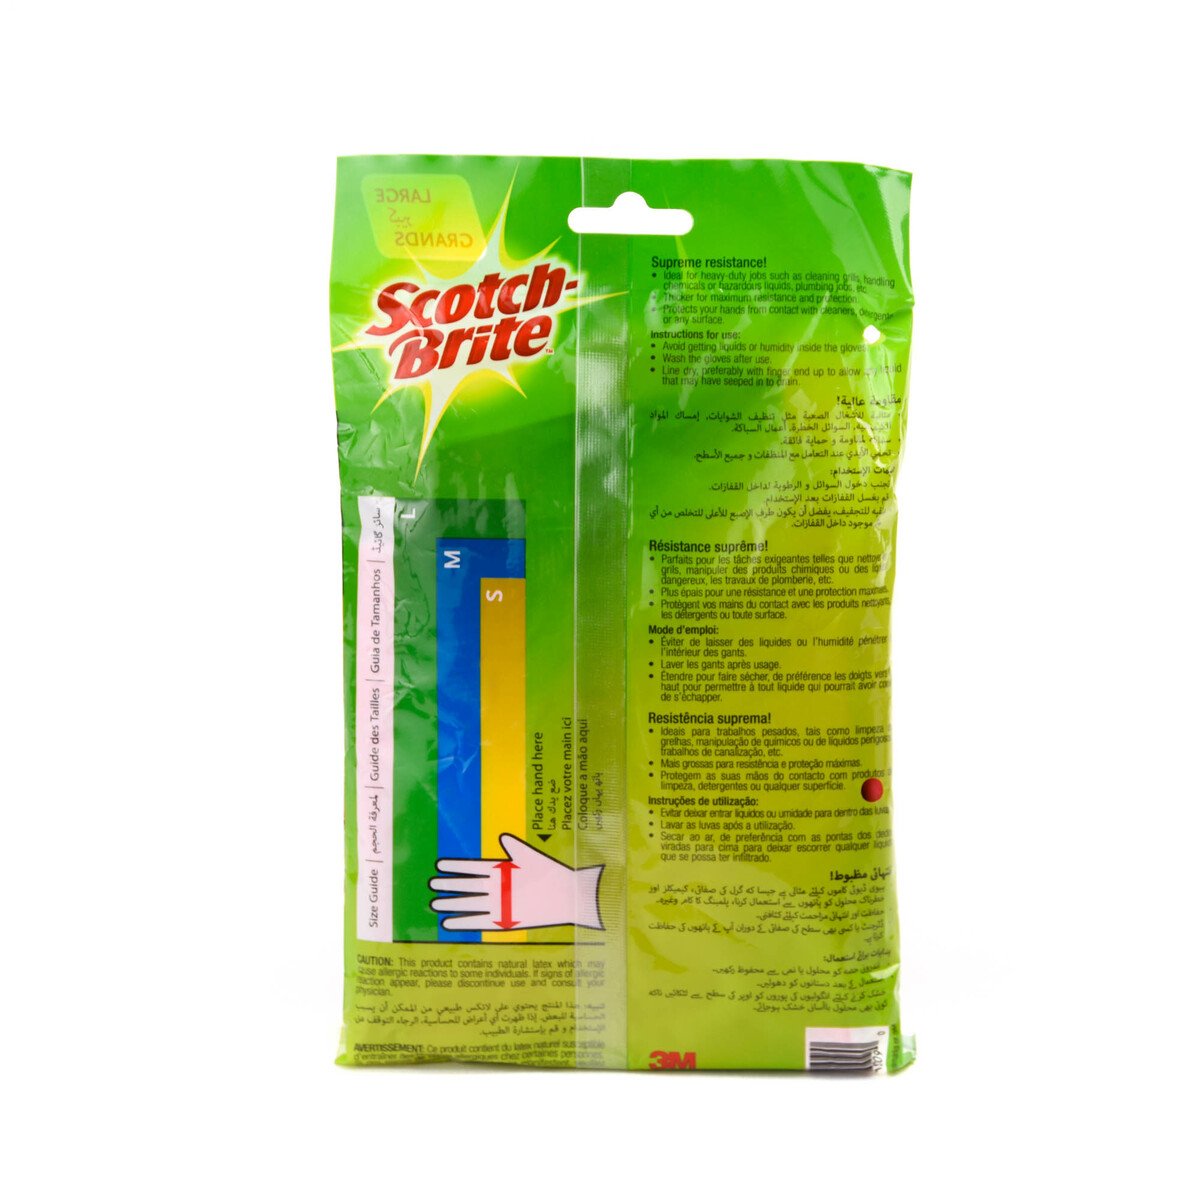 Scotch Brite Extra Heavy Duty Outdoor Hand Gloves Large 1 Pair